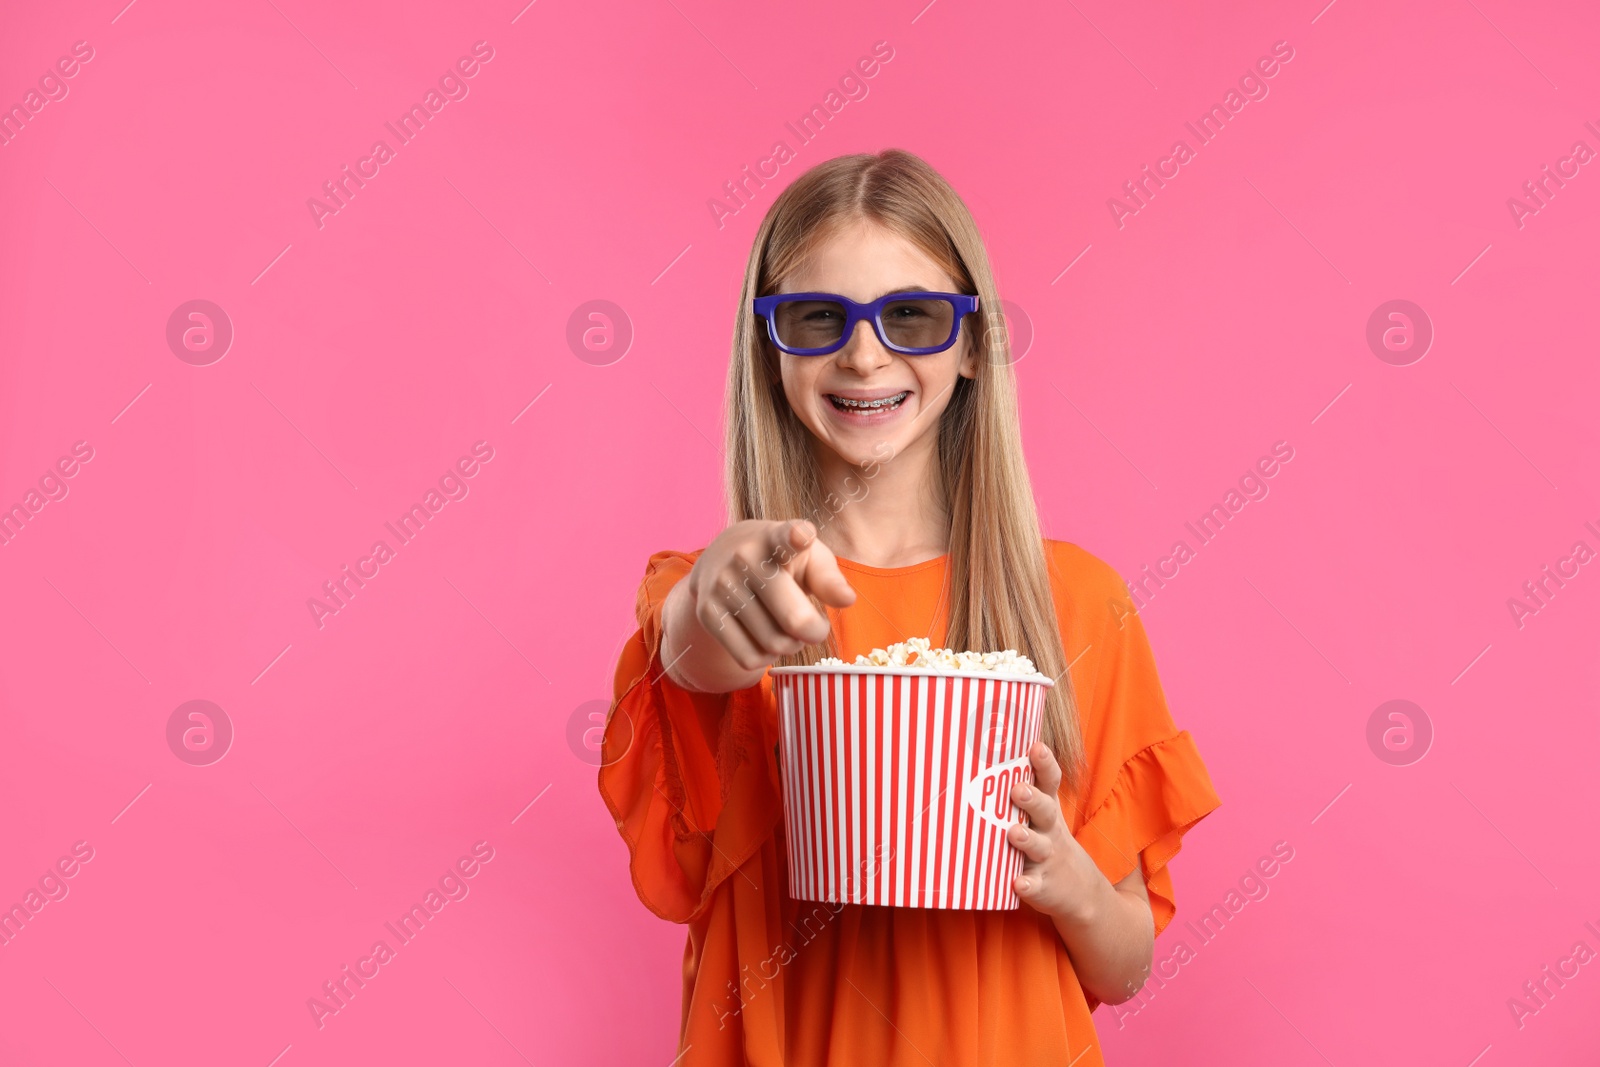 Photo of Teenage girl with 3D glasses and popcorn during cinema show on color background